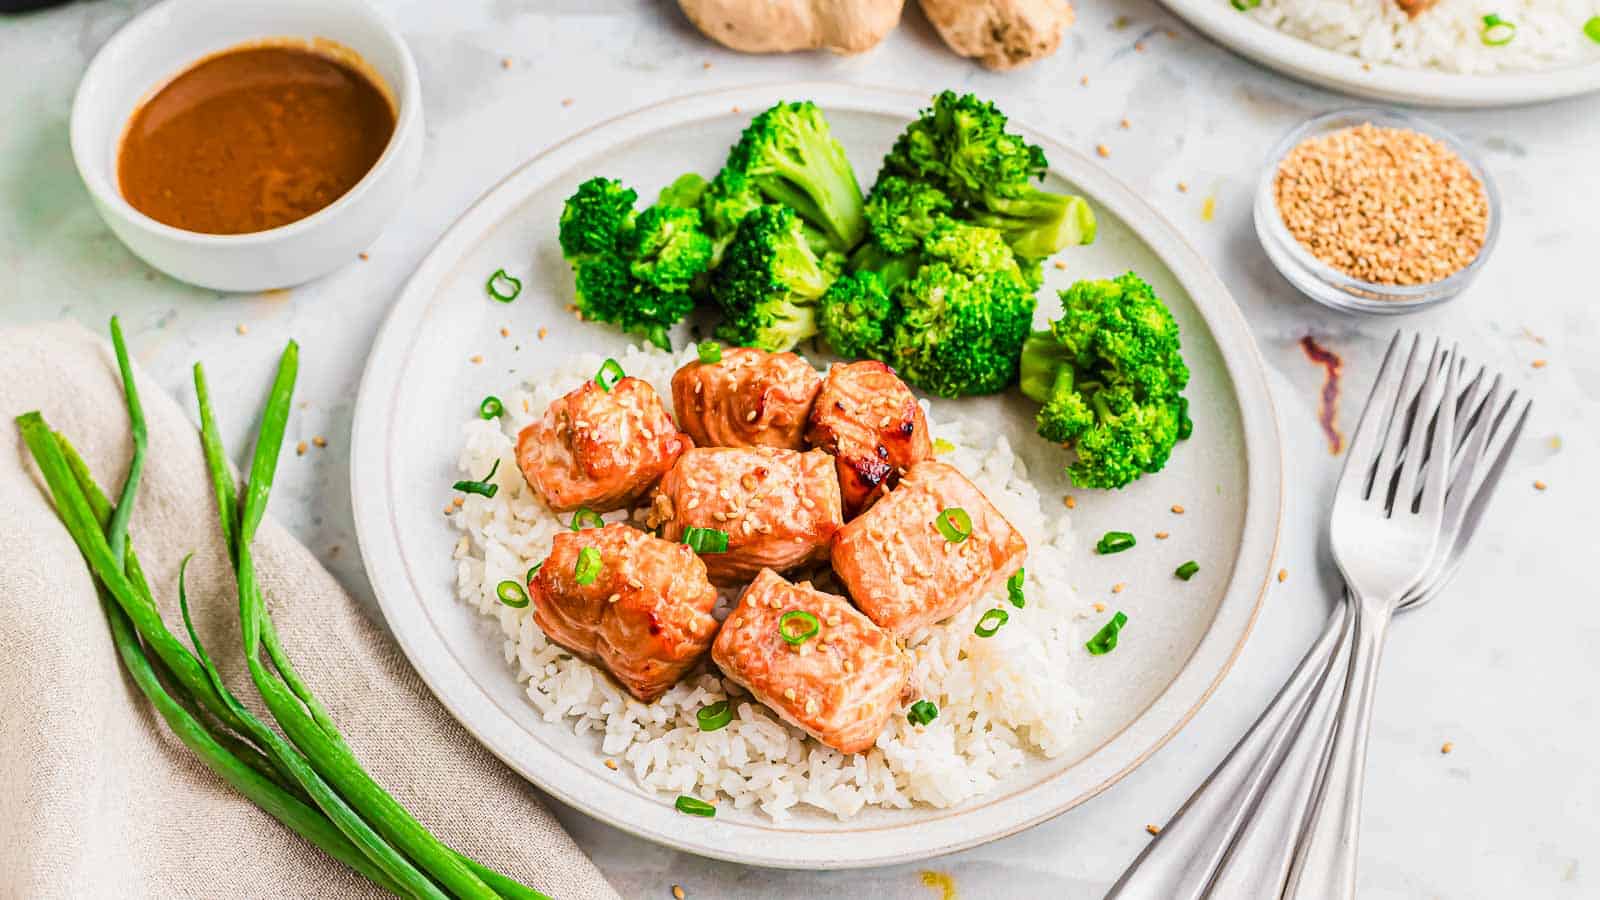 A plate with air fryer salmon bites, rice, broccoli and sauce on it.